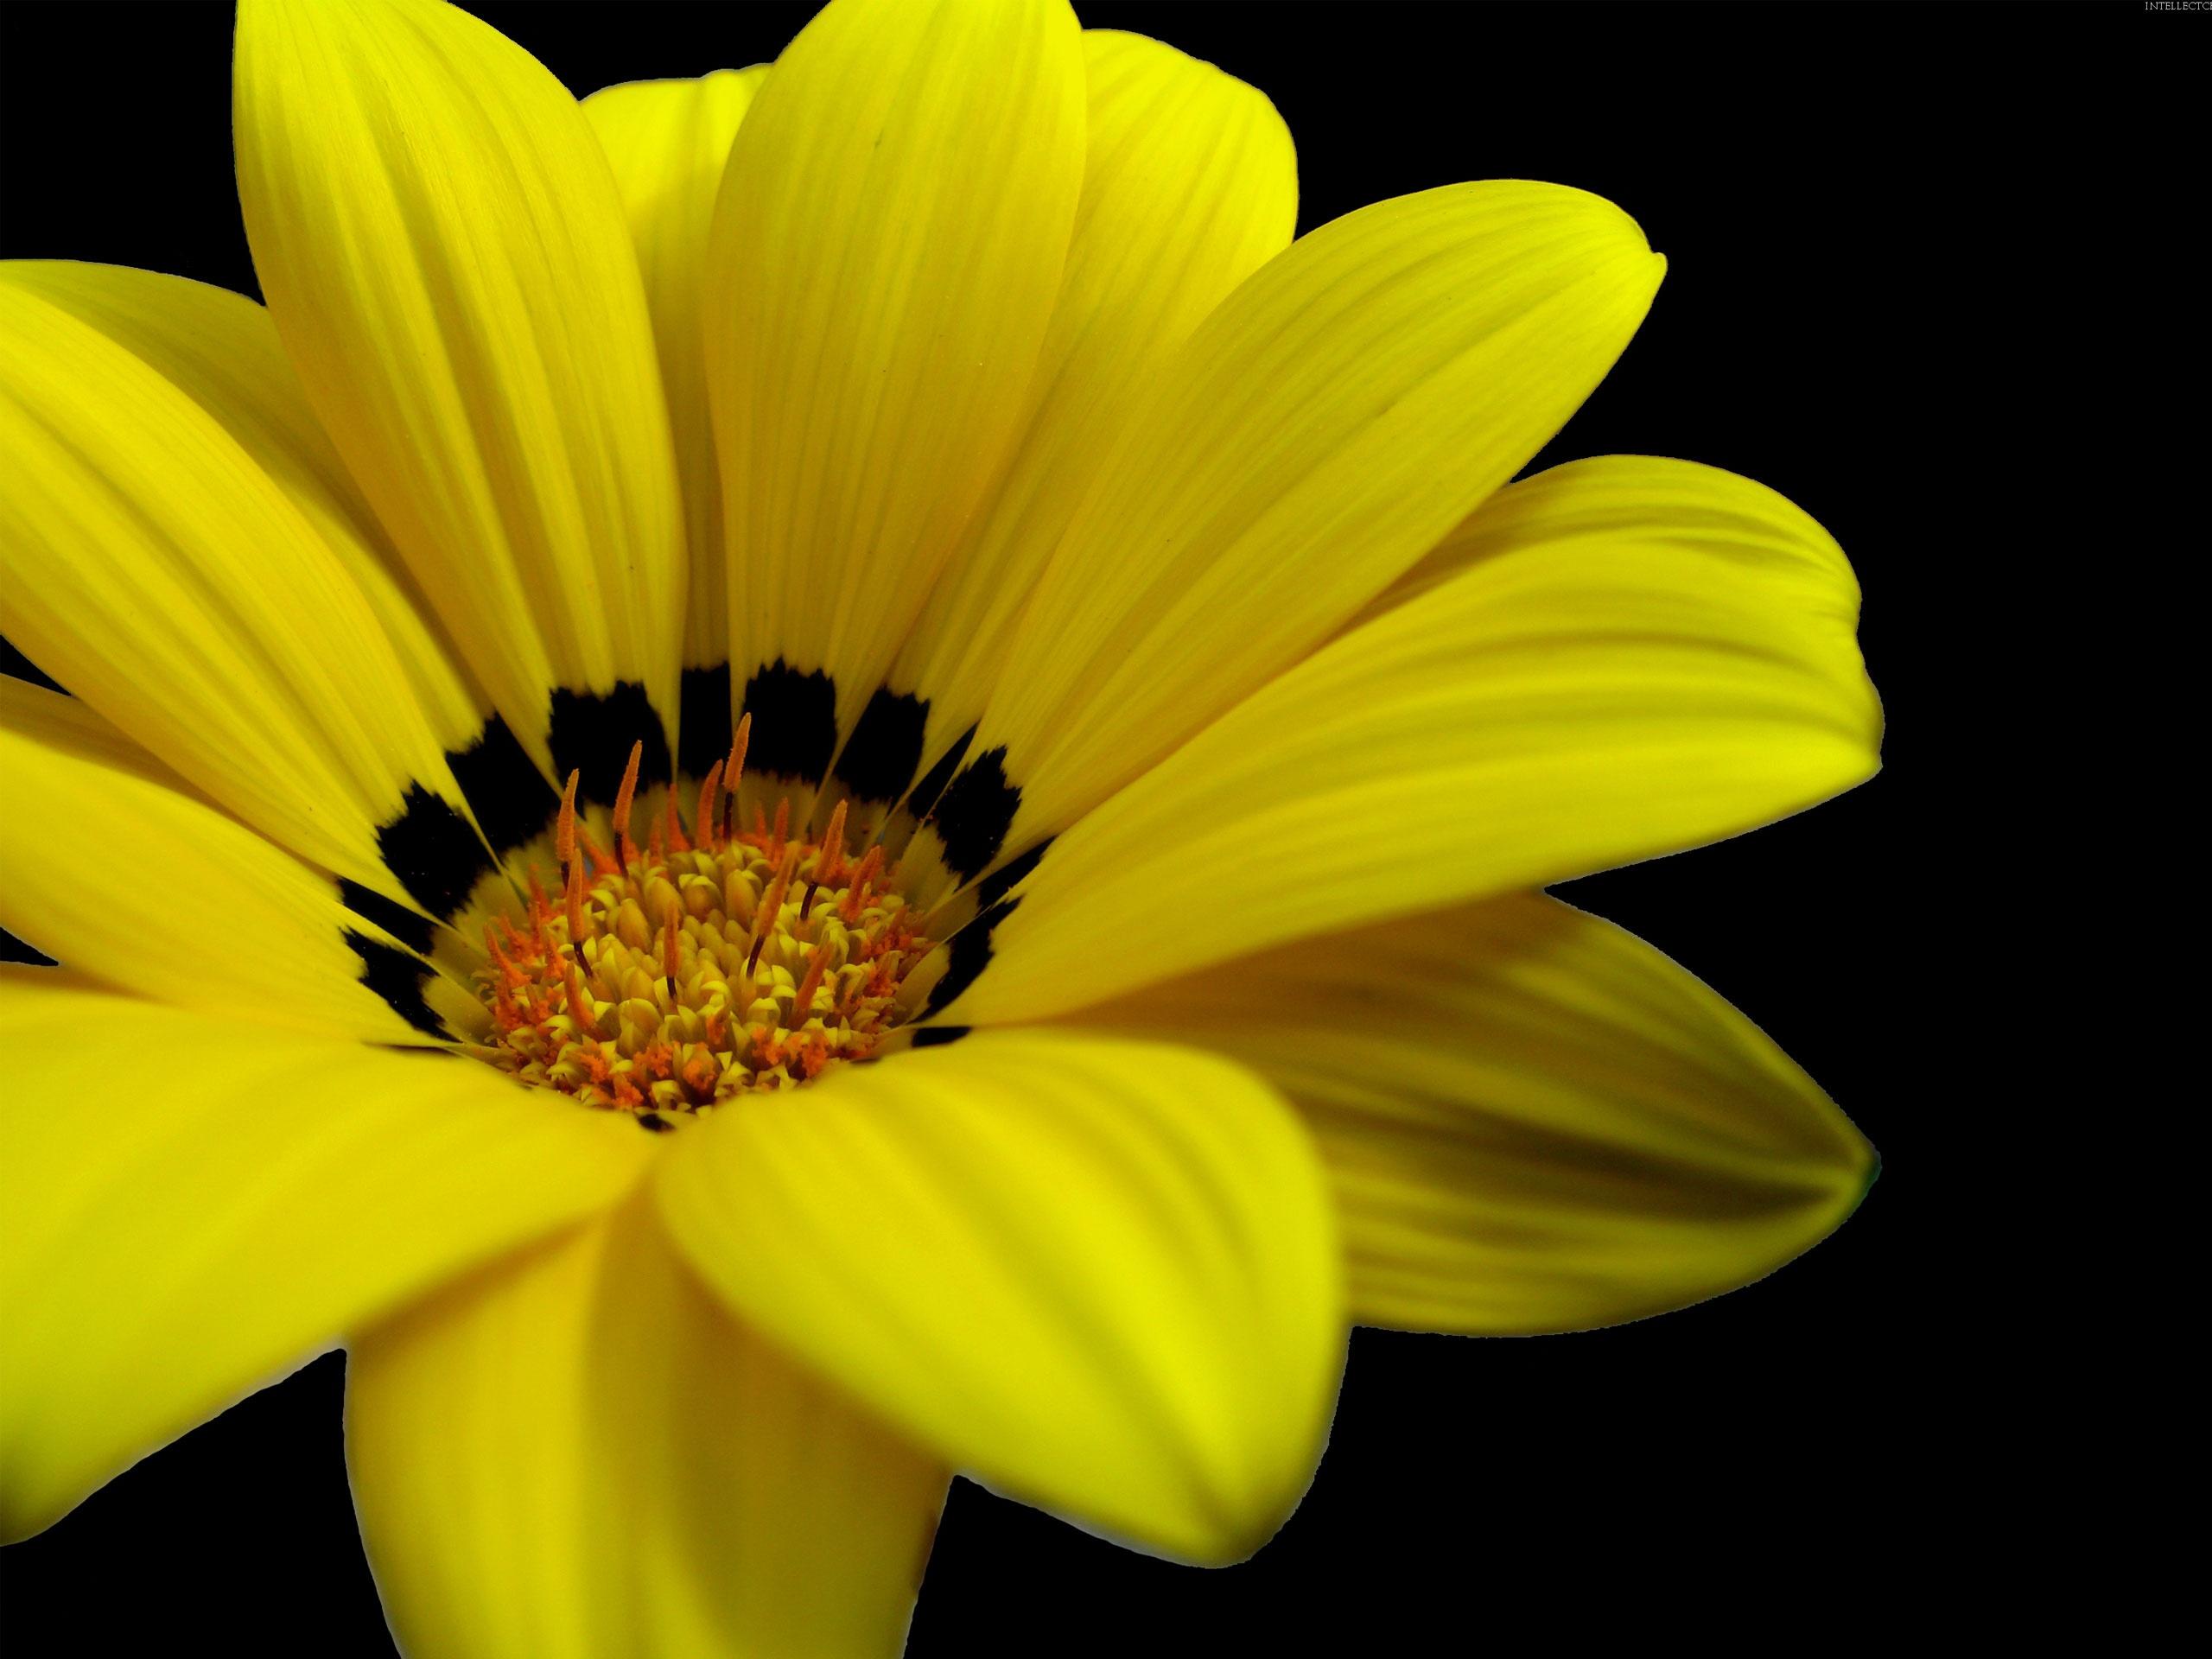 Great Yellow Flower Wallpaper in jpg format for free download